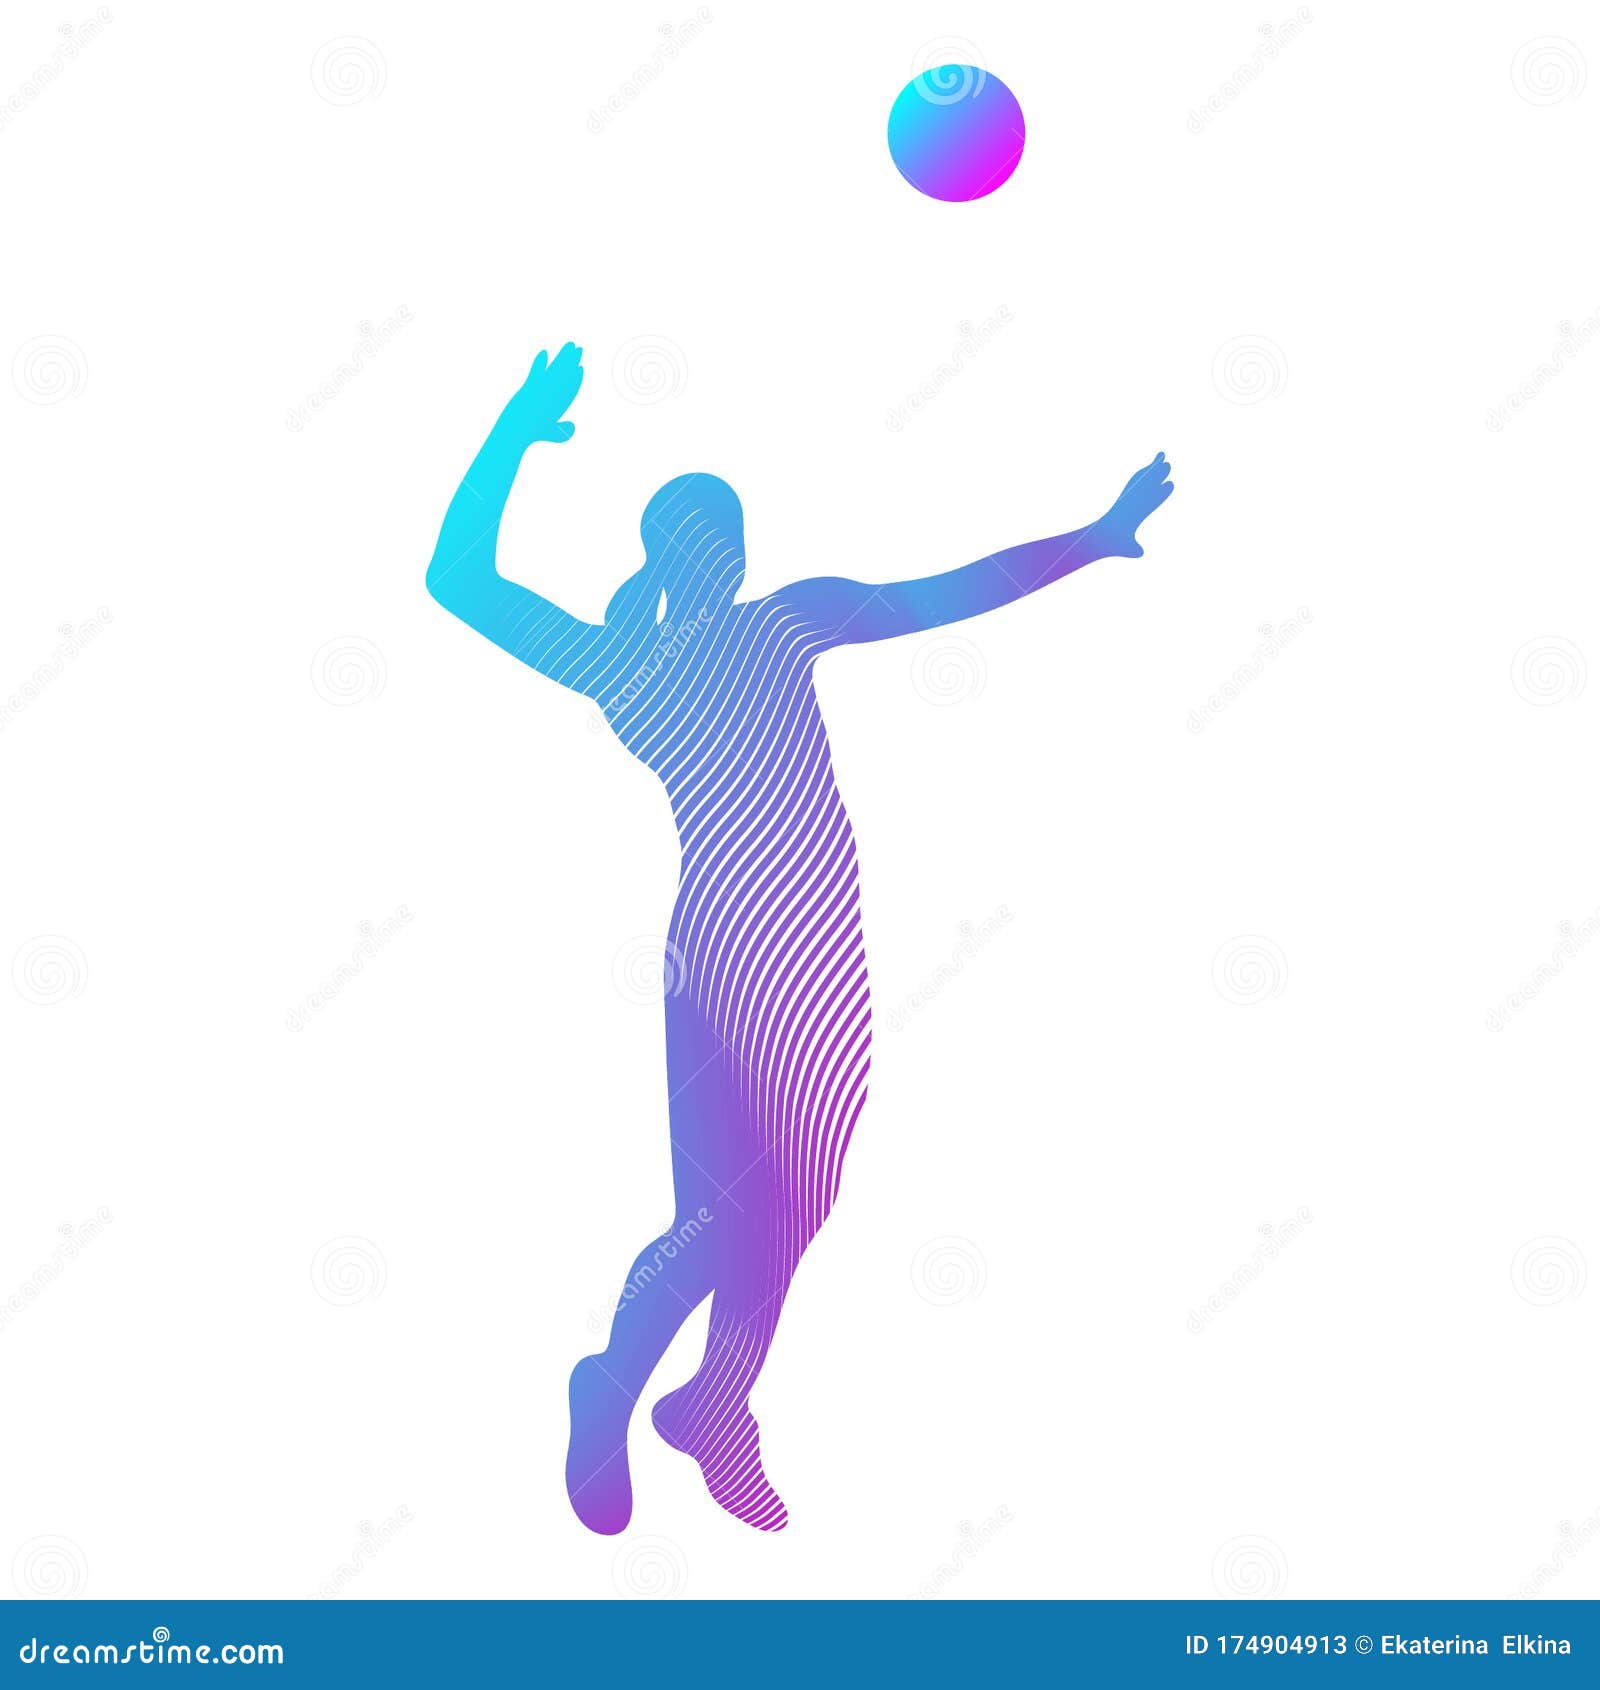 Volleyball Player Serving the Ball - Black and White Vector Outline ...